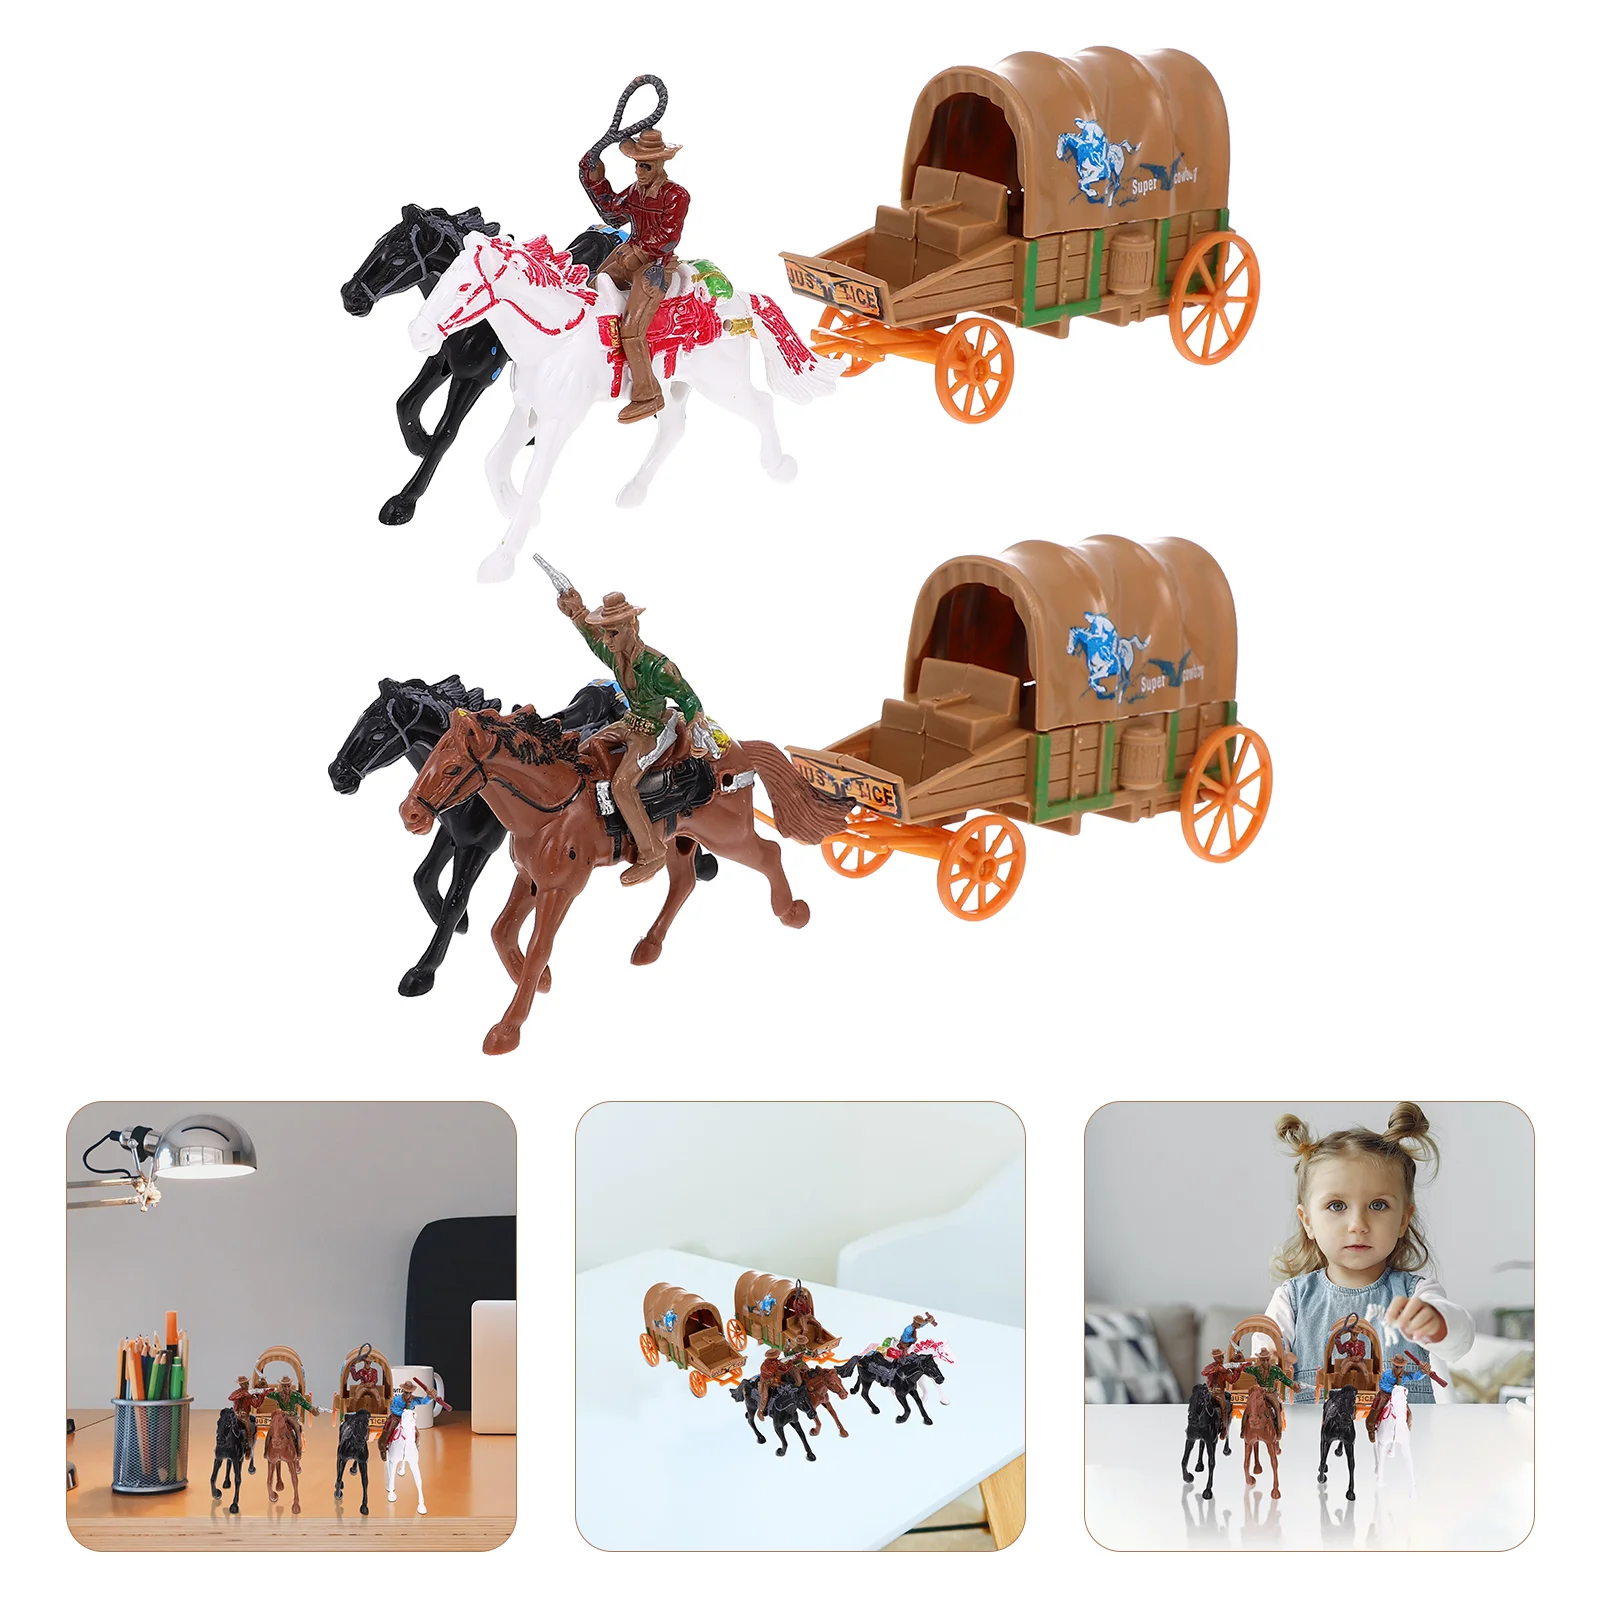 

2 Sets Cleaner Tiny House Toys Farm World Toys Cowboy Carriage Toy for Tabletop Kids Decoration Home